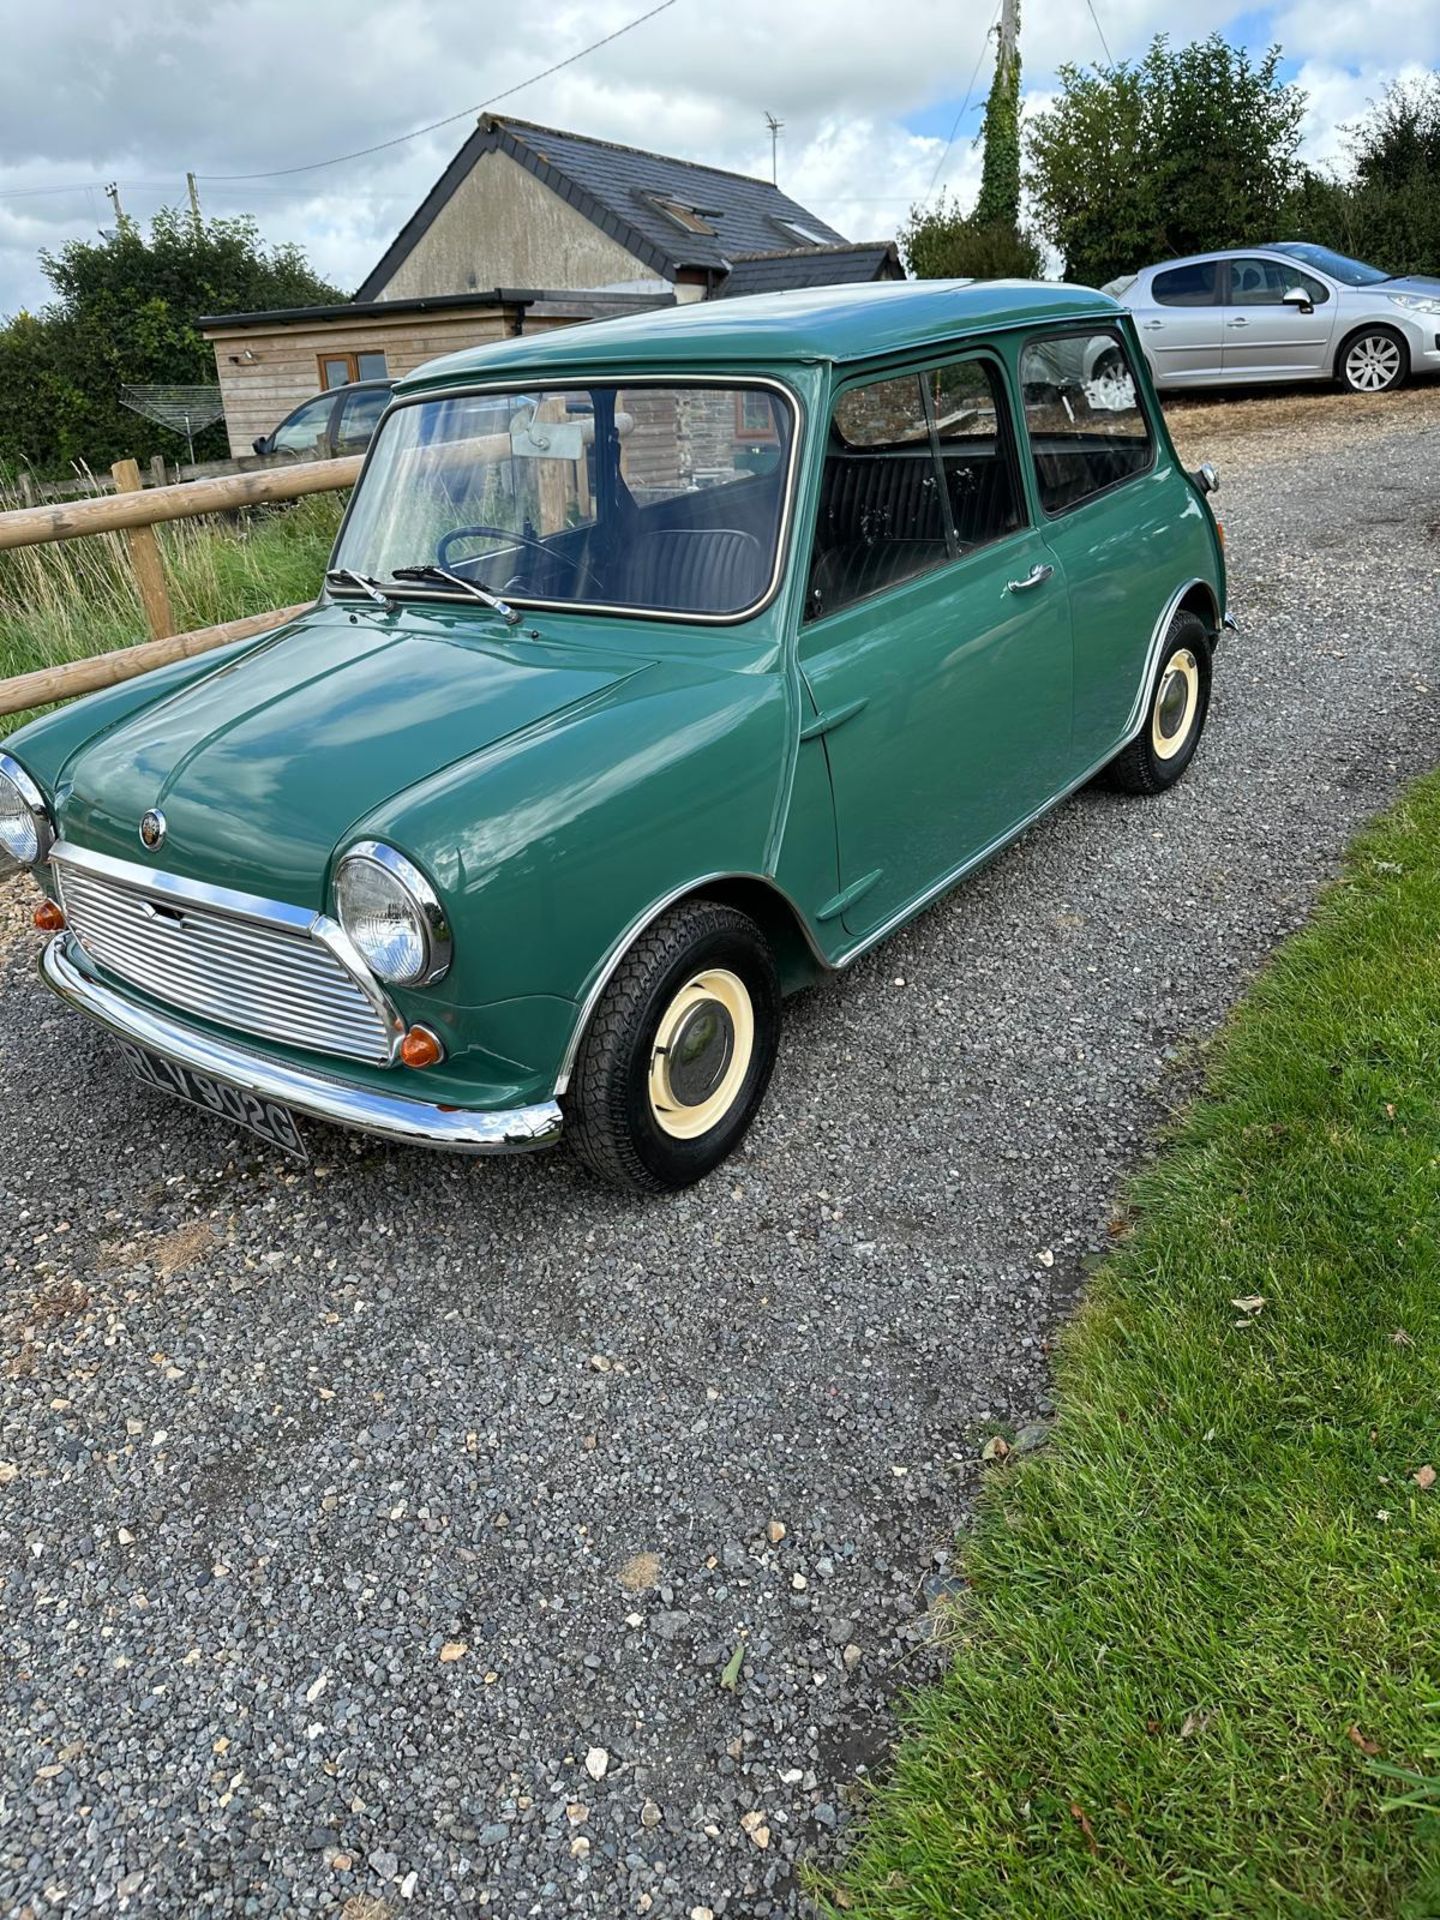 1968 Mini 860 - just 17,000 miles from new! - Image 3 of 27